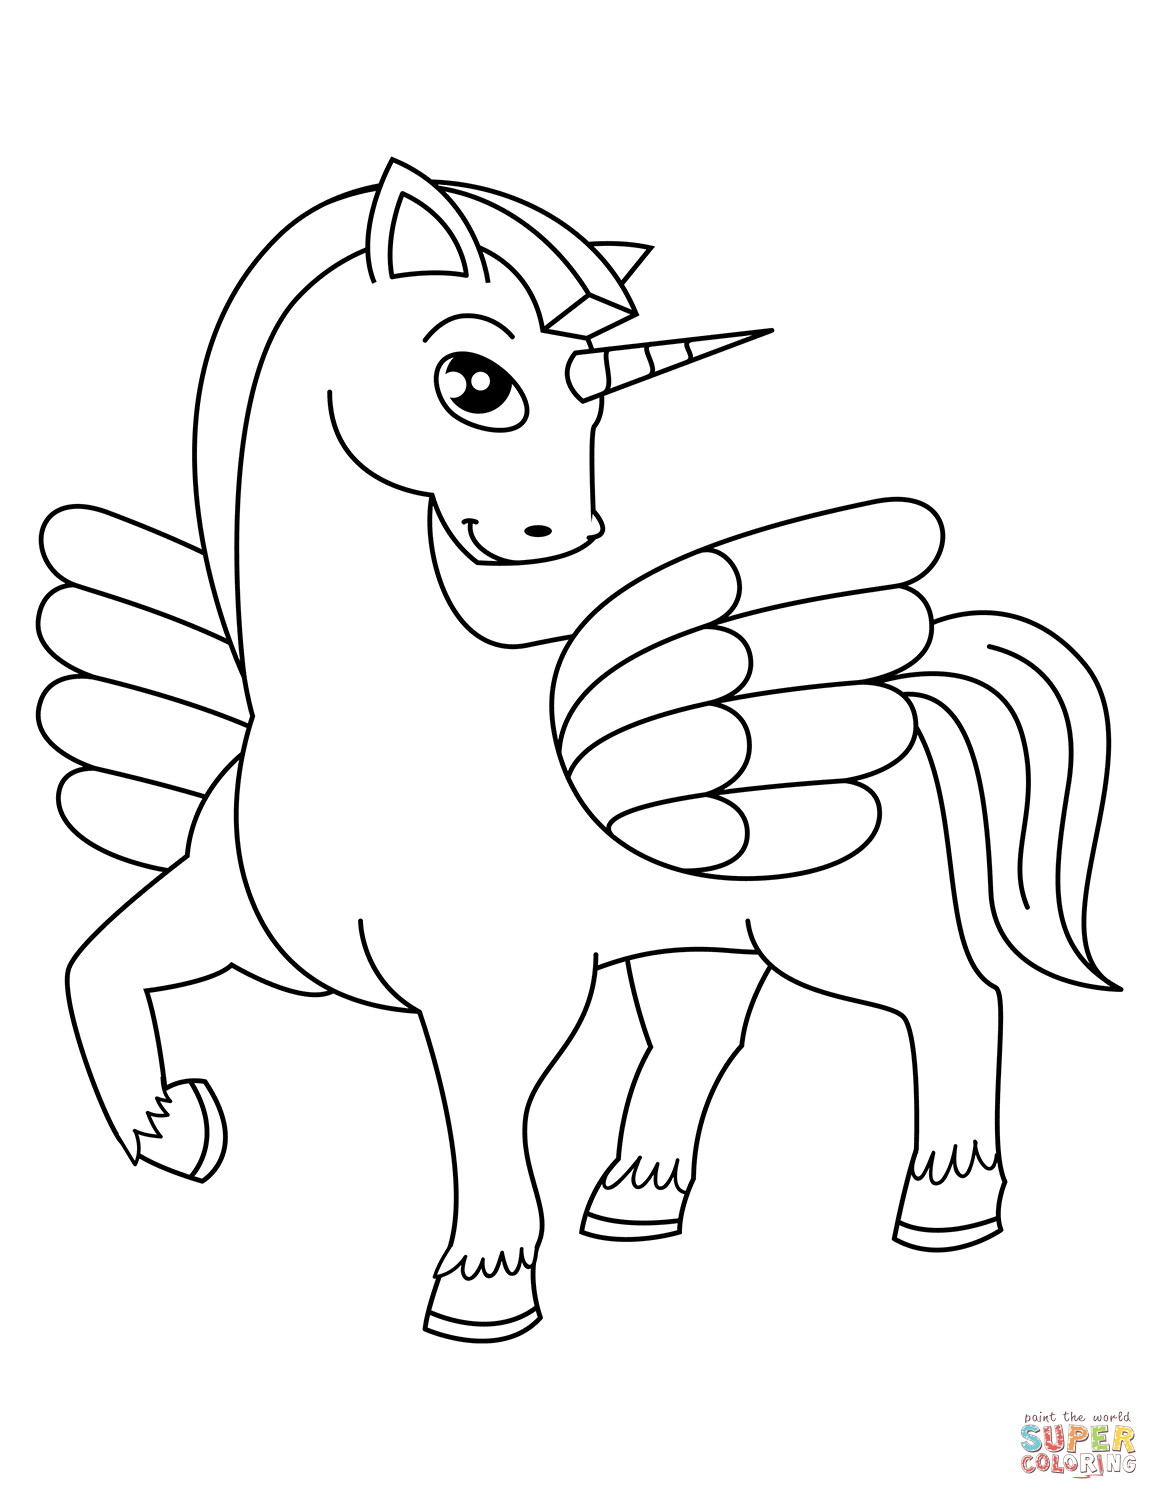 Coloring Pages For Kids Unicorn
 Cute Winged Unicorn coloring page